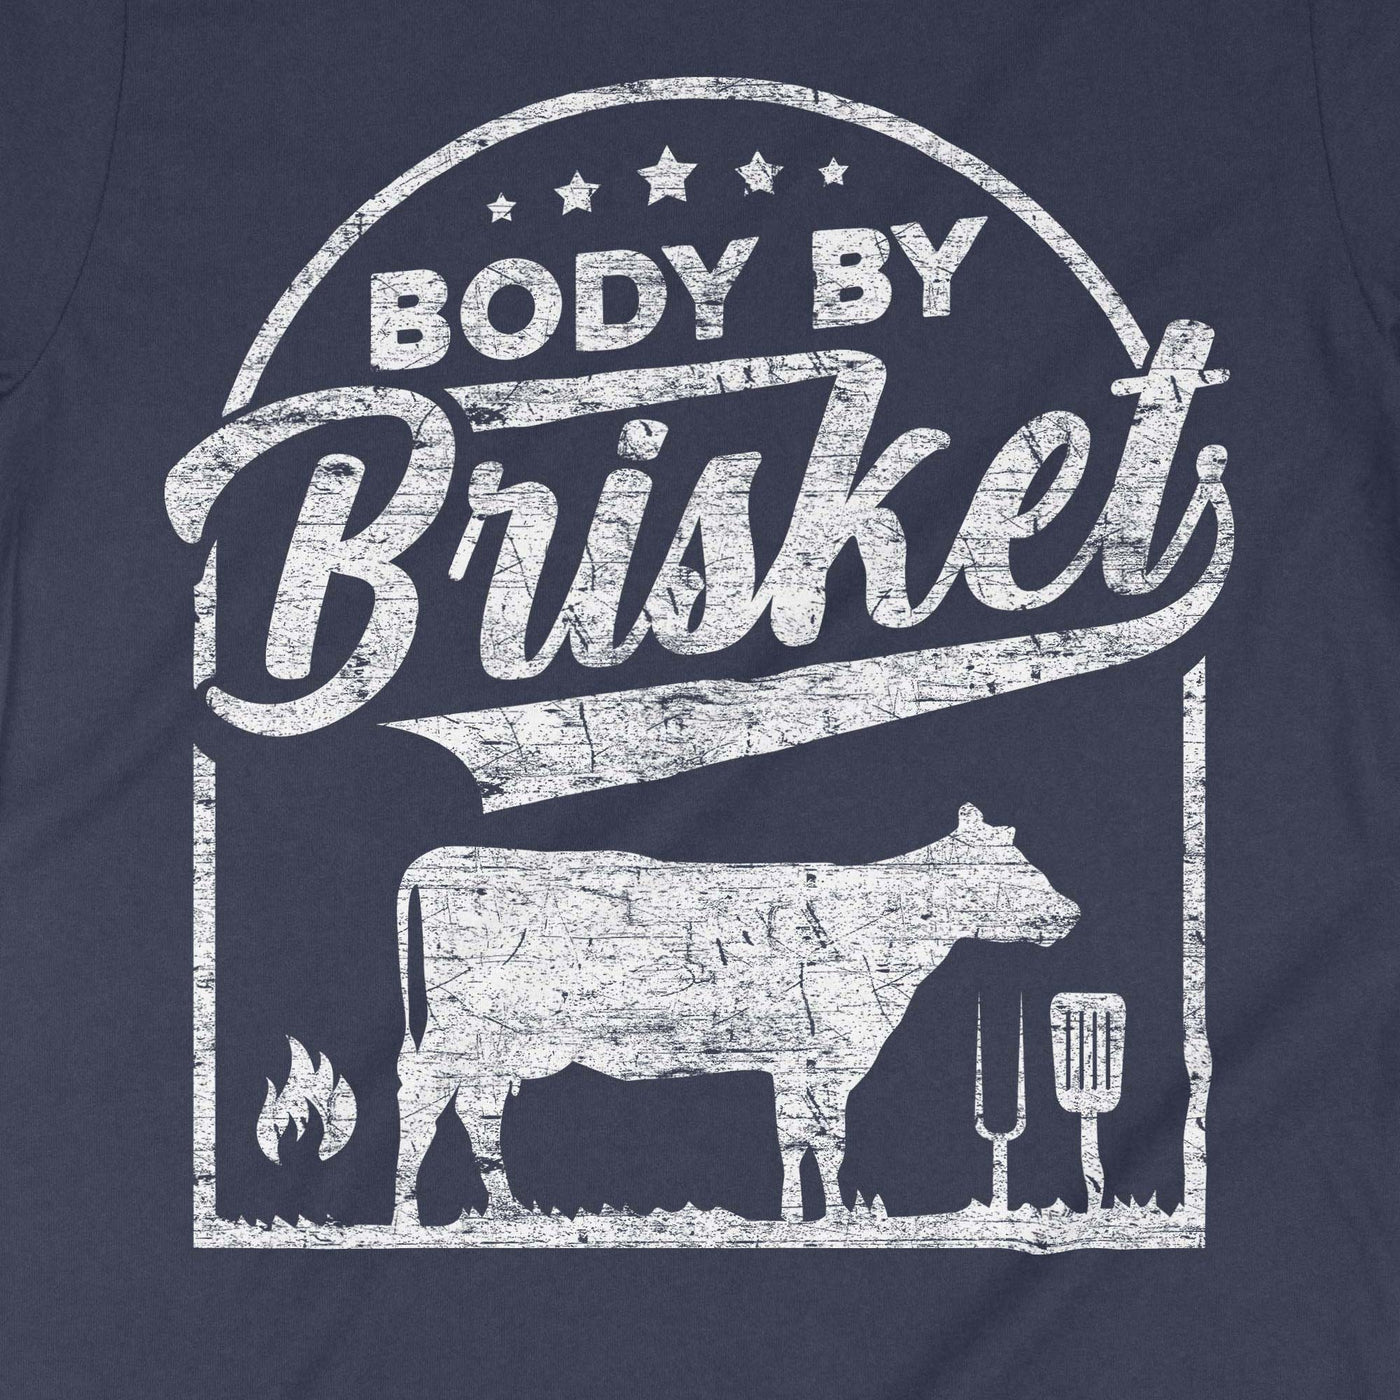 Body By Brisket, BBQ Grill T-Shirt, Funny Barbeque Dad, Gift for Grillmaster, Pork Grilling Shirt